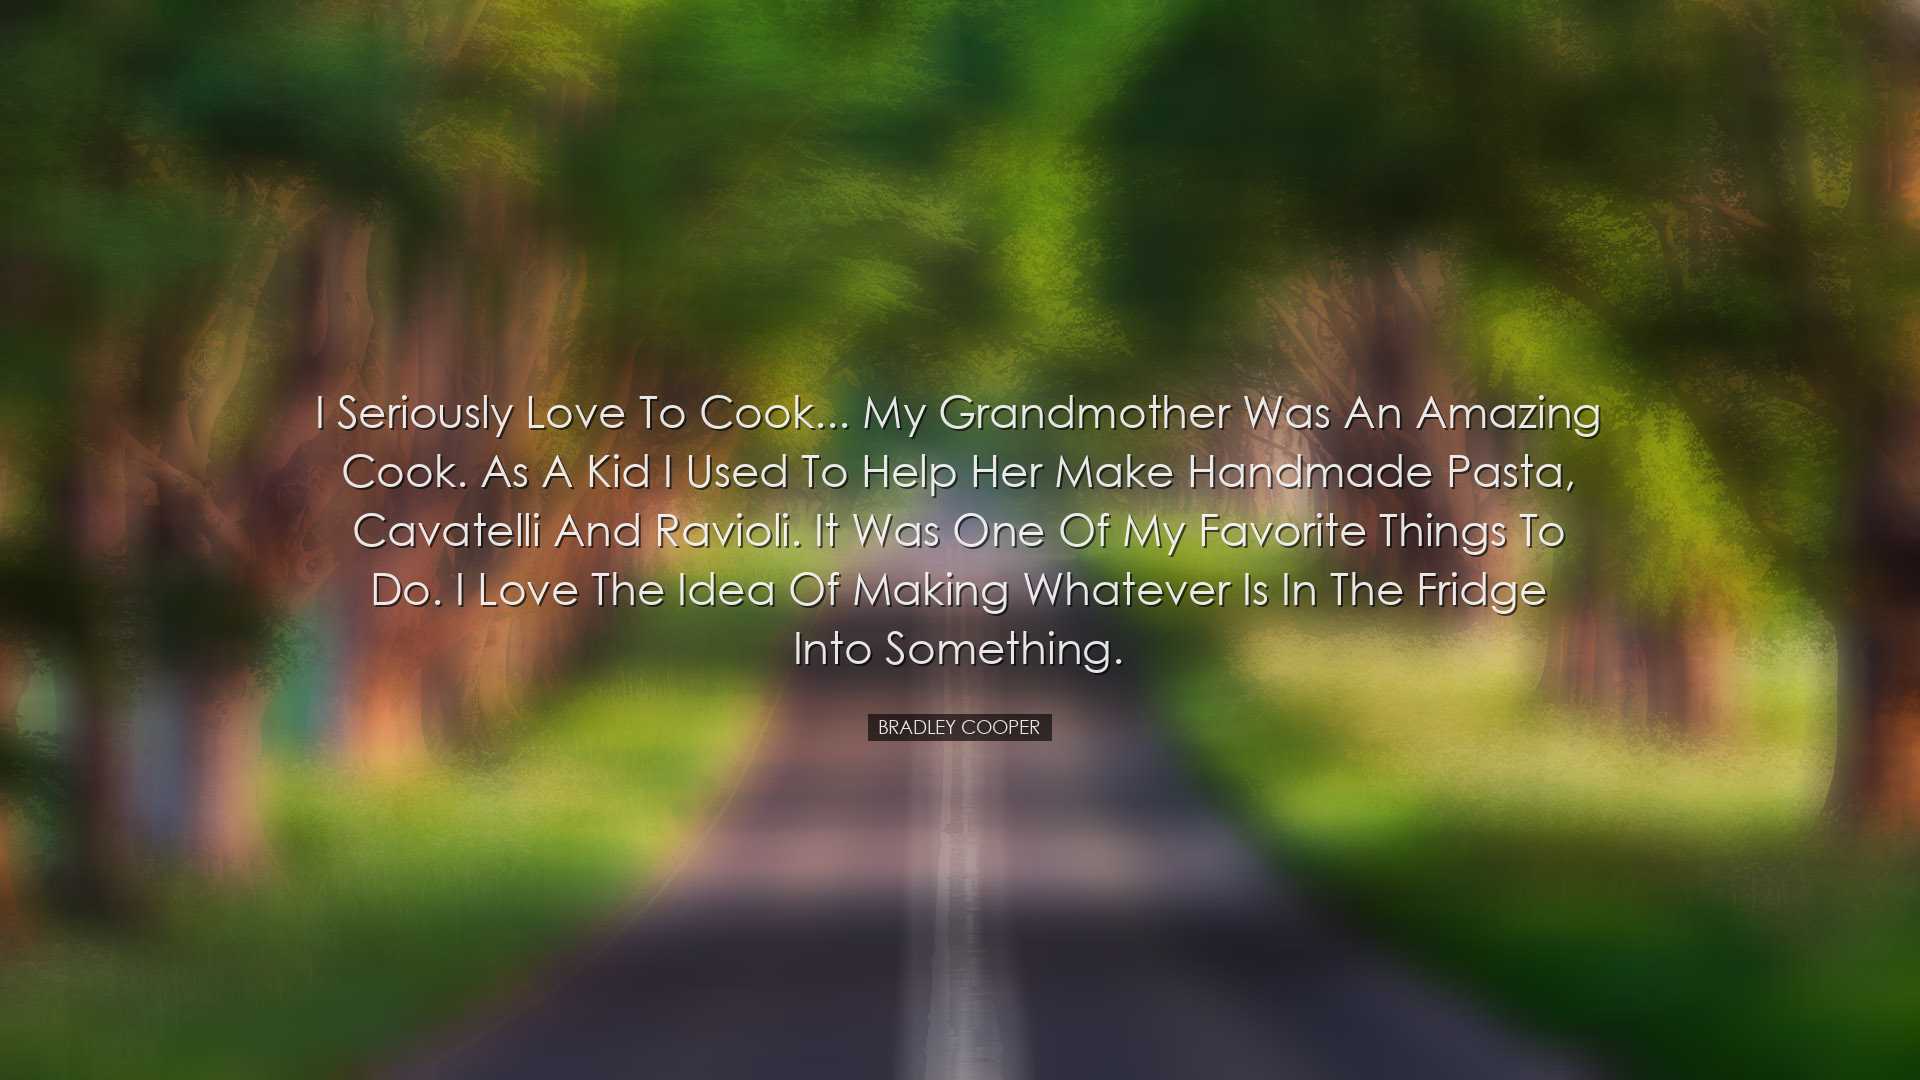 I seriously love to cook... My grandmother was an amazing cook. As